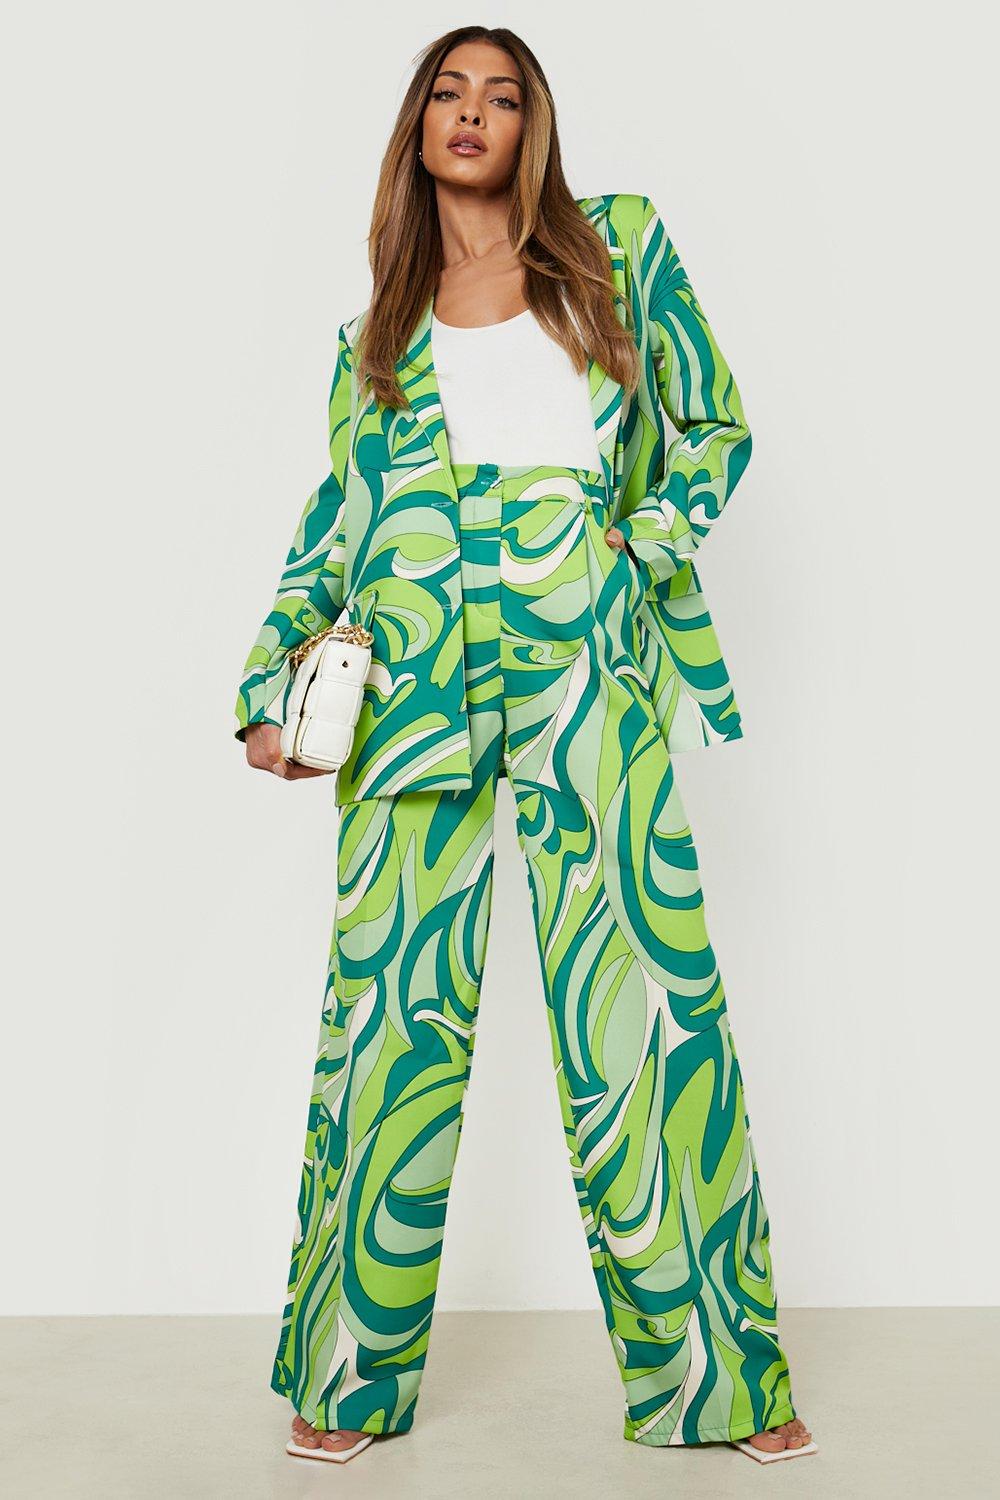 70s Outfits – 70s Style Ideas for Women Womens Abstract Print Wide Leg Pants - Green - 12 $22.00 AT vintagedancer.com